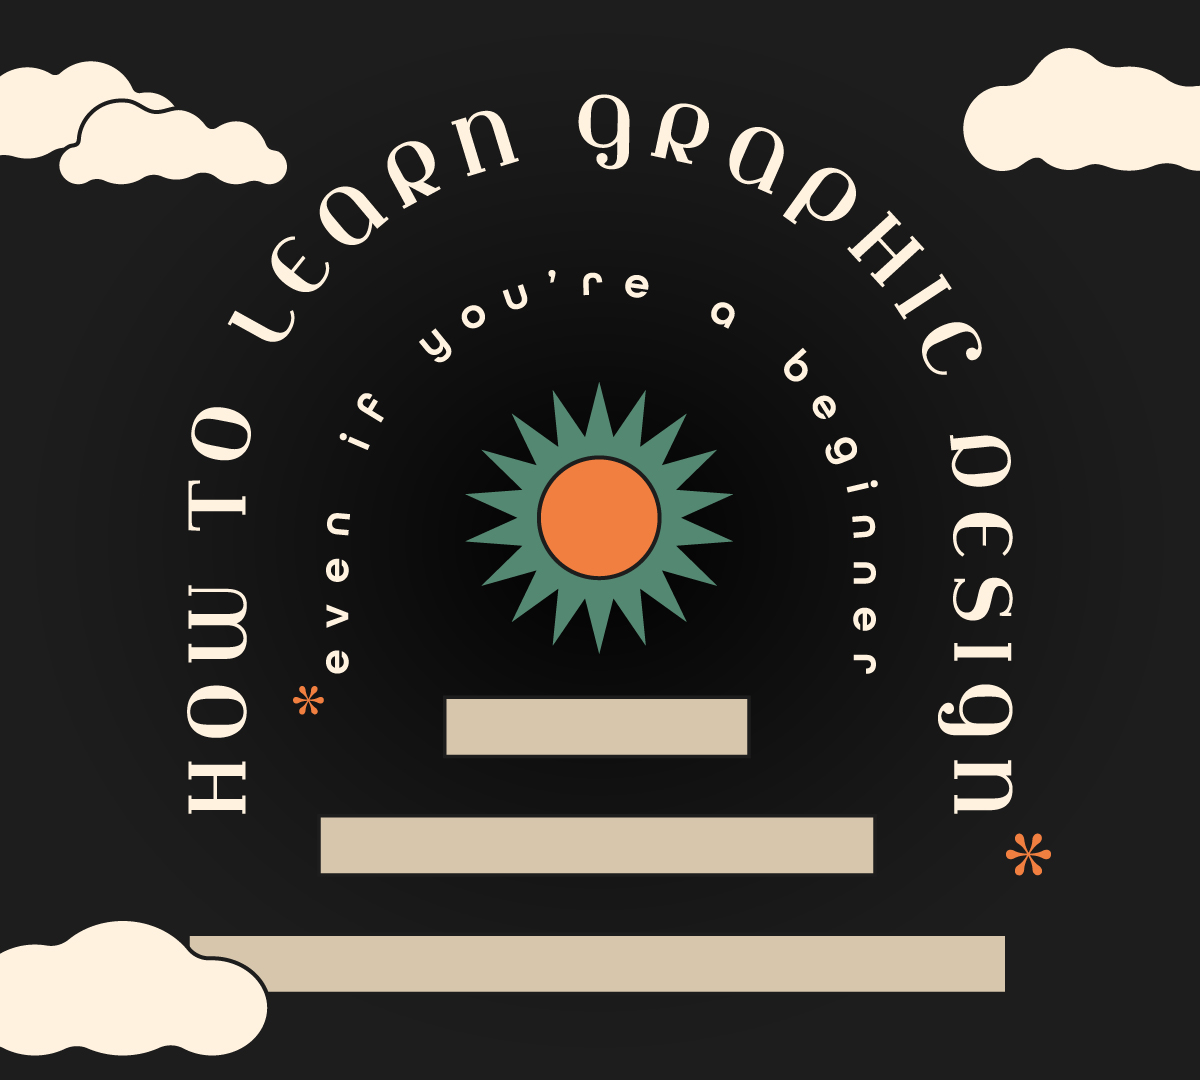 black background with the text how to learn graphic design even if you are a beginner in white font together with some white clouds and an orange sun with green rays